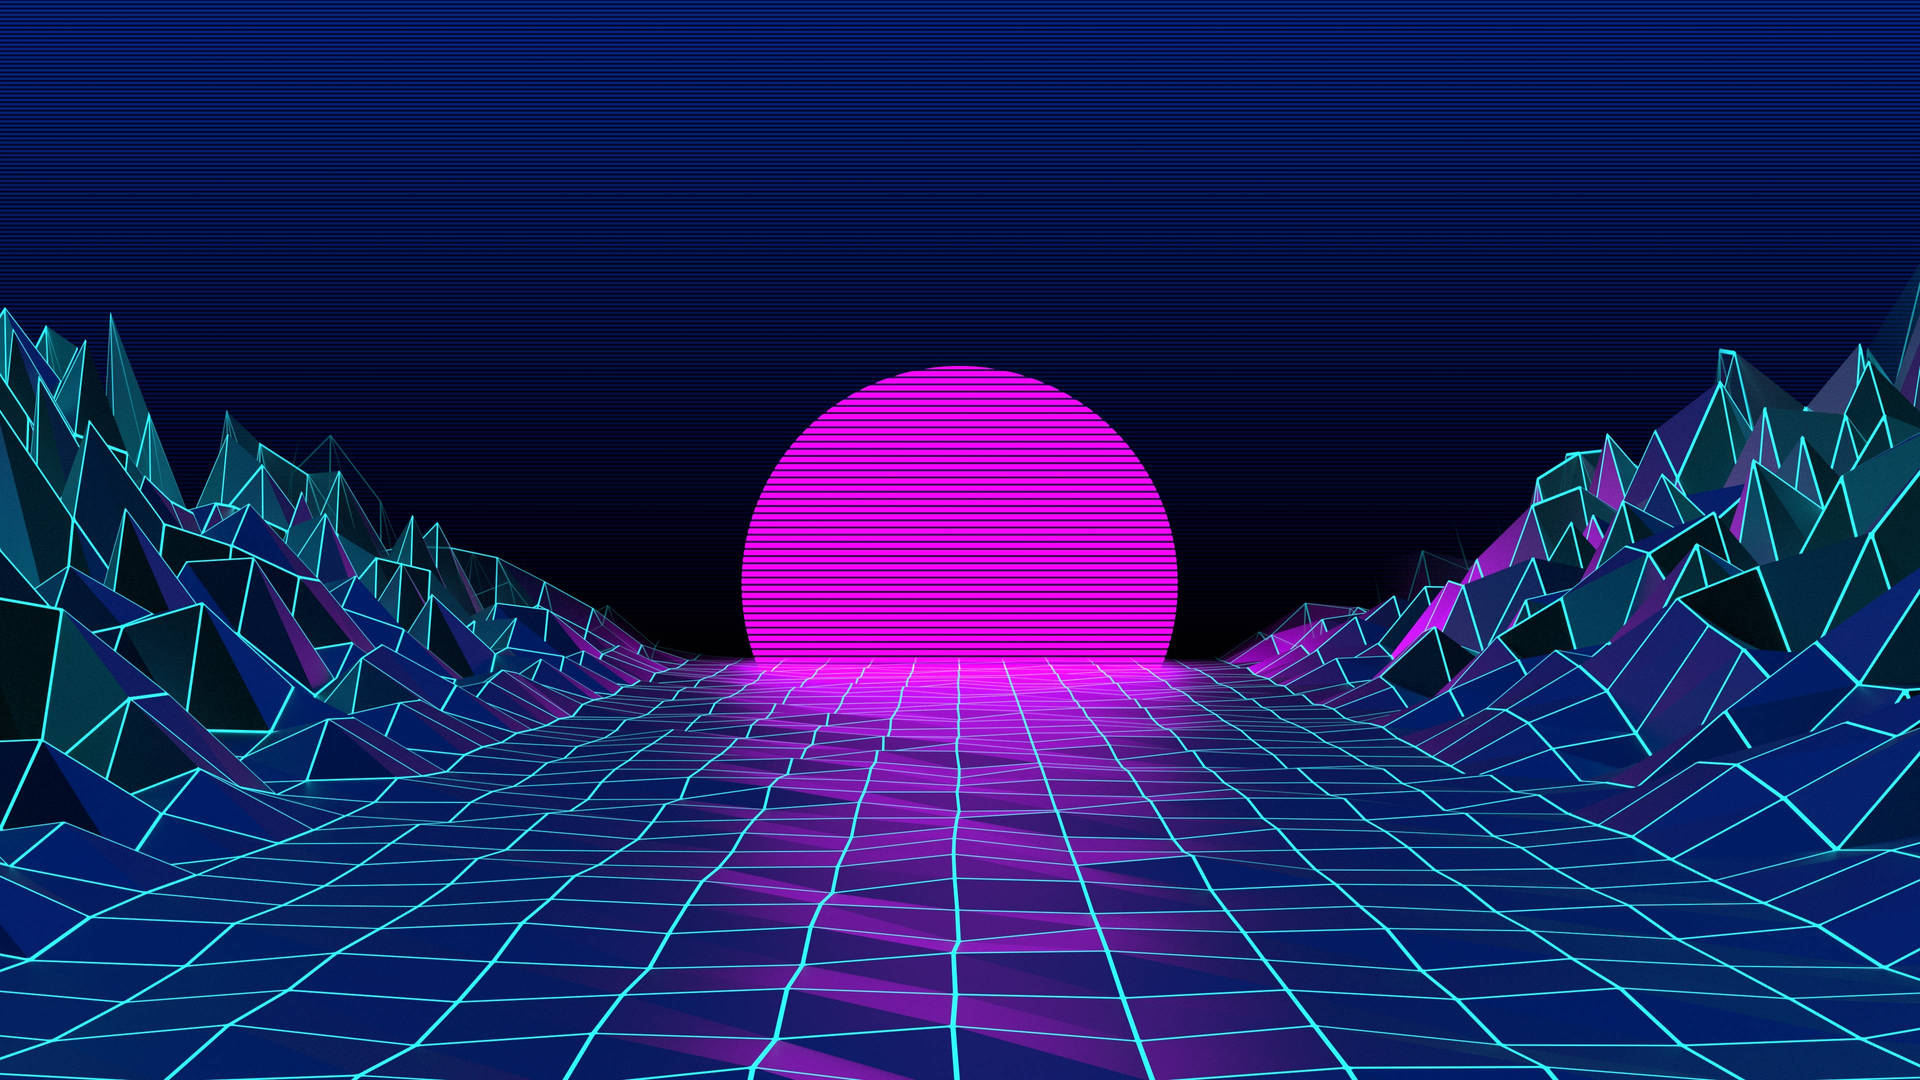 80s Synthwave Aesthetic Cover Background